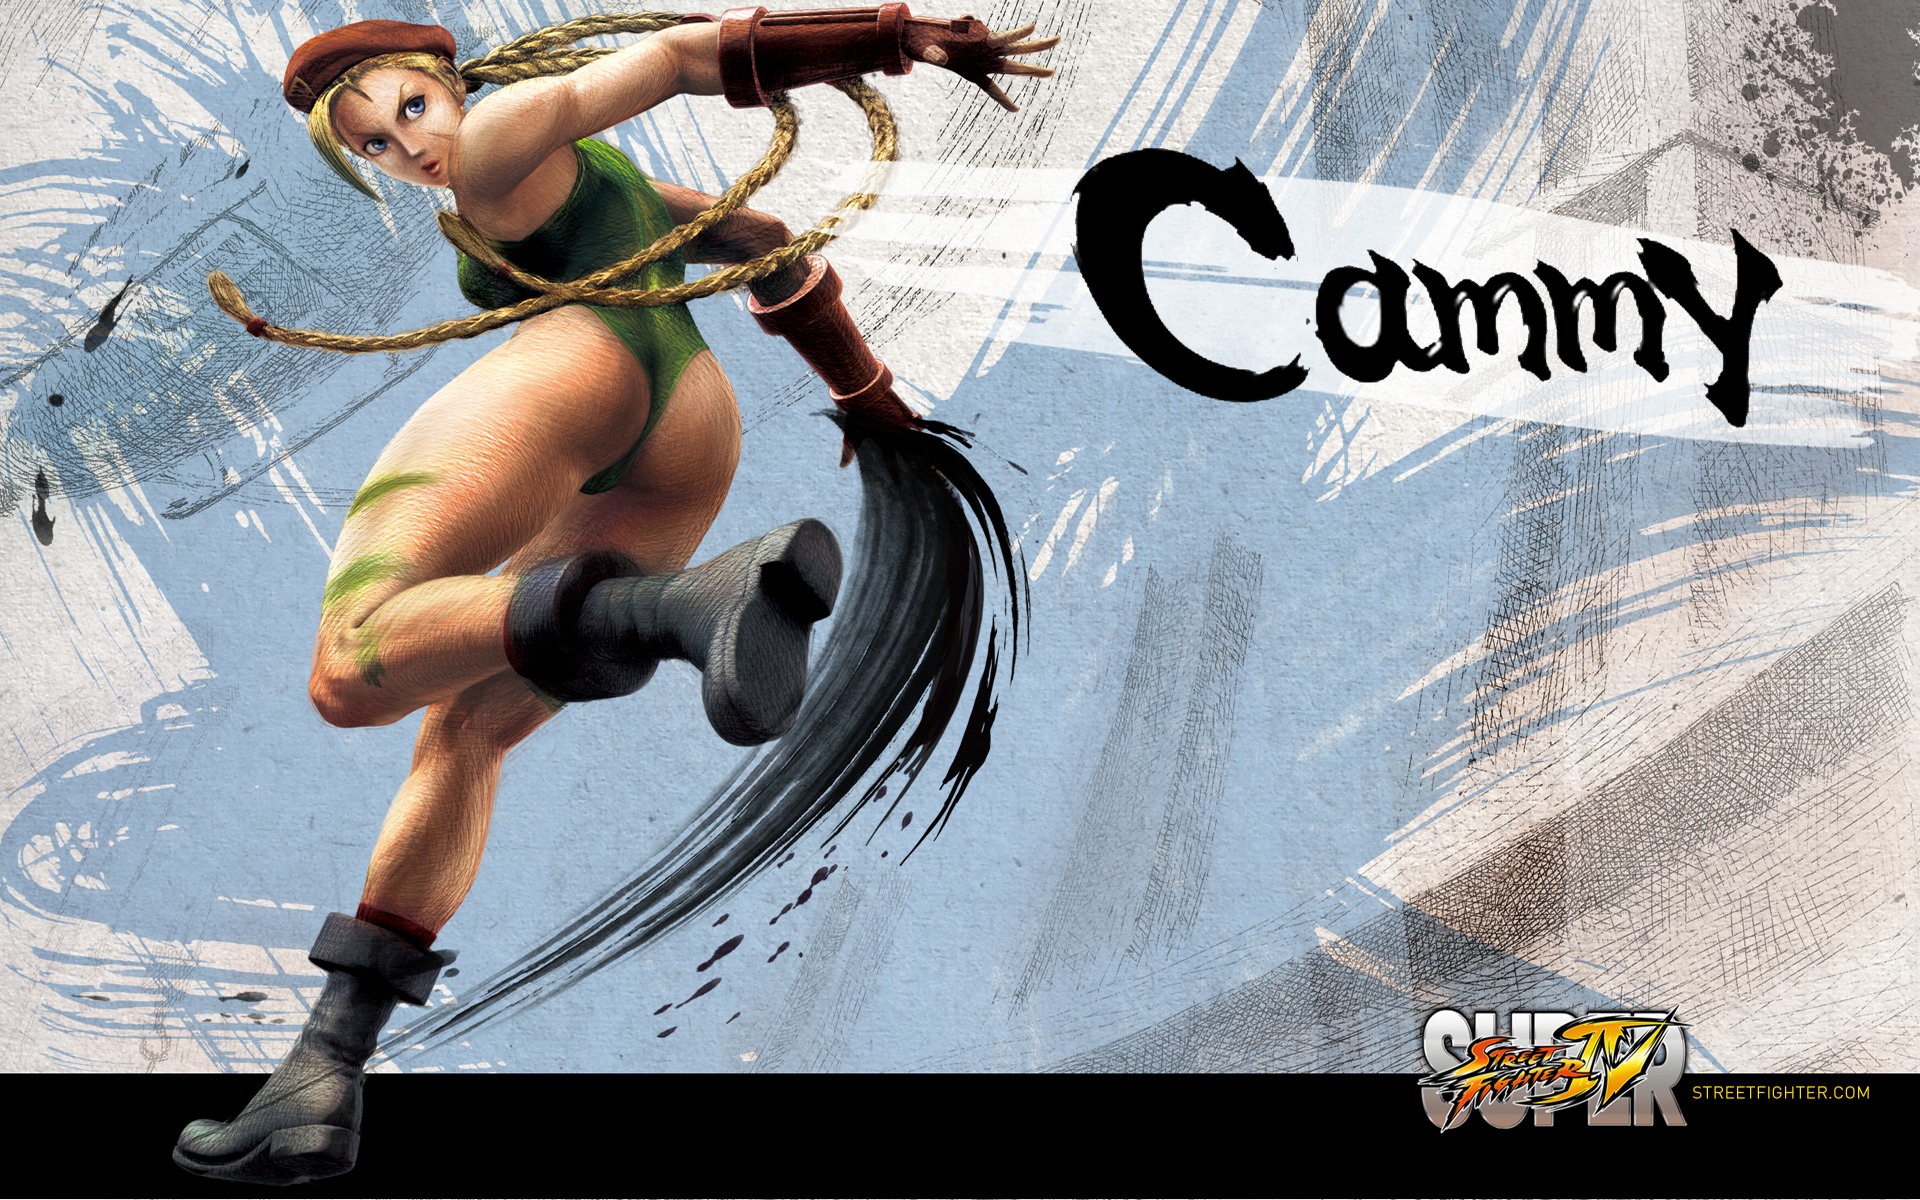 550833 cammy vega street fighter  Rare Gallery HD Wallpapers